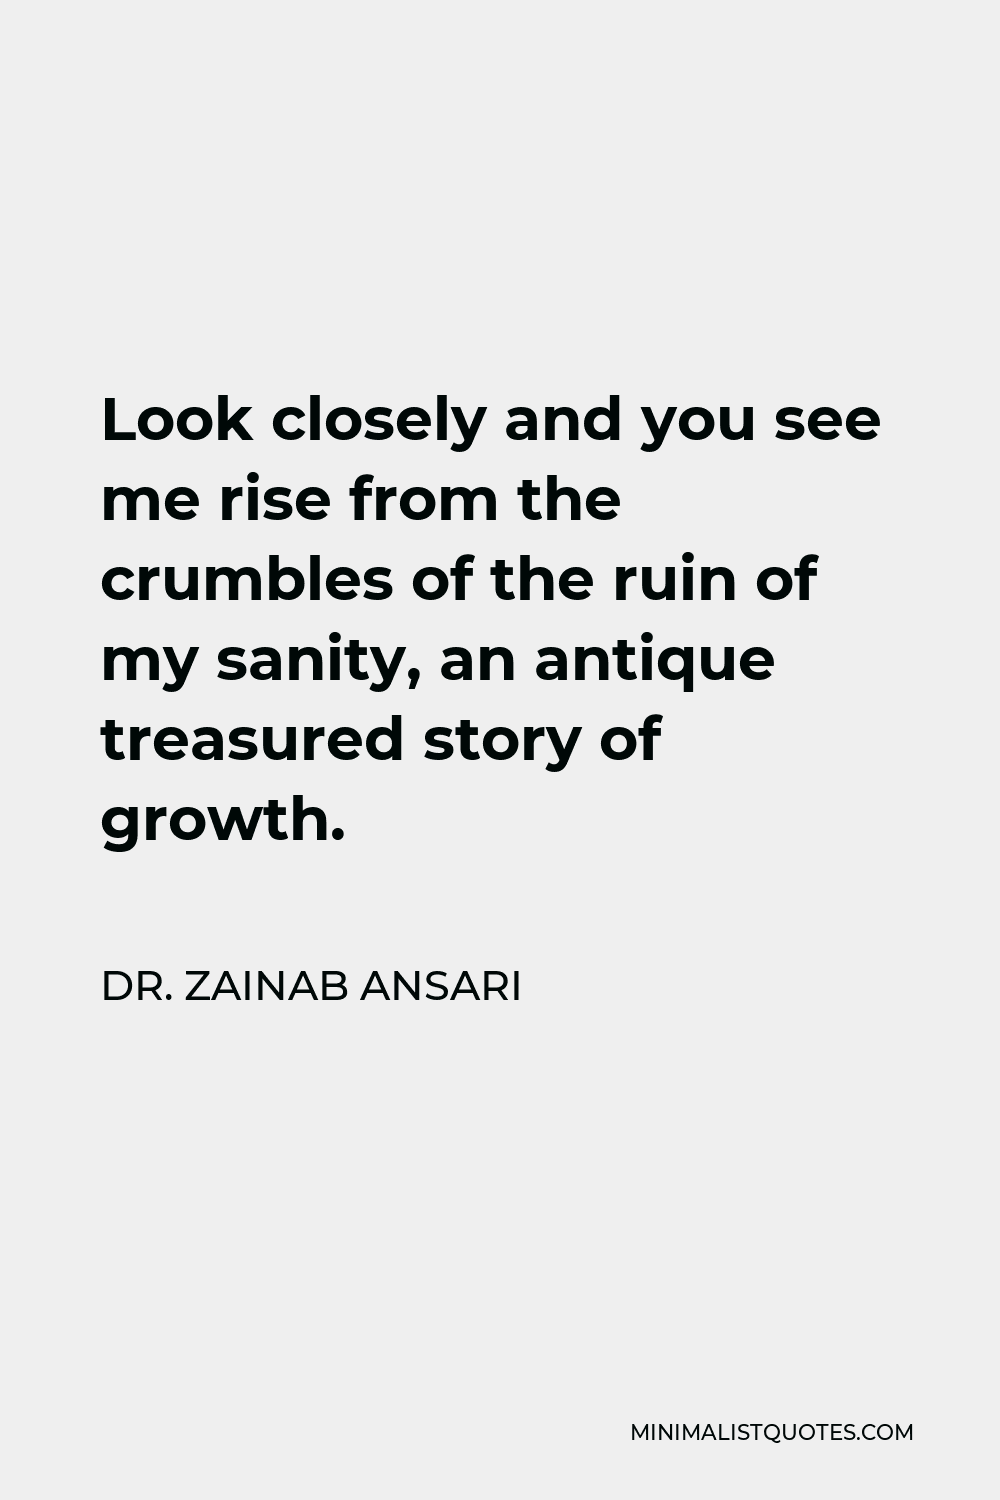 Dr. Zainab Ansari Quote - Look closely and you see me rise from the crumbles of the ruin of my sanity, an antique treasured story of growth.